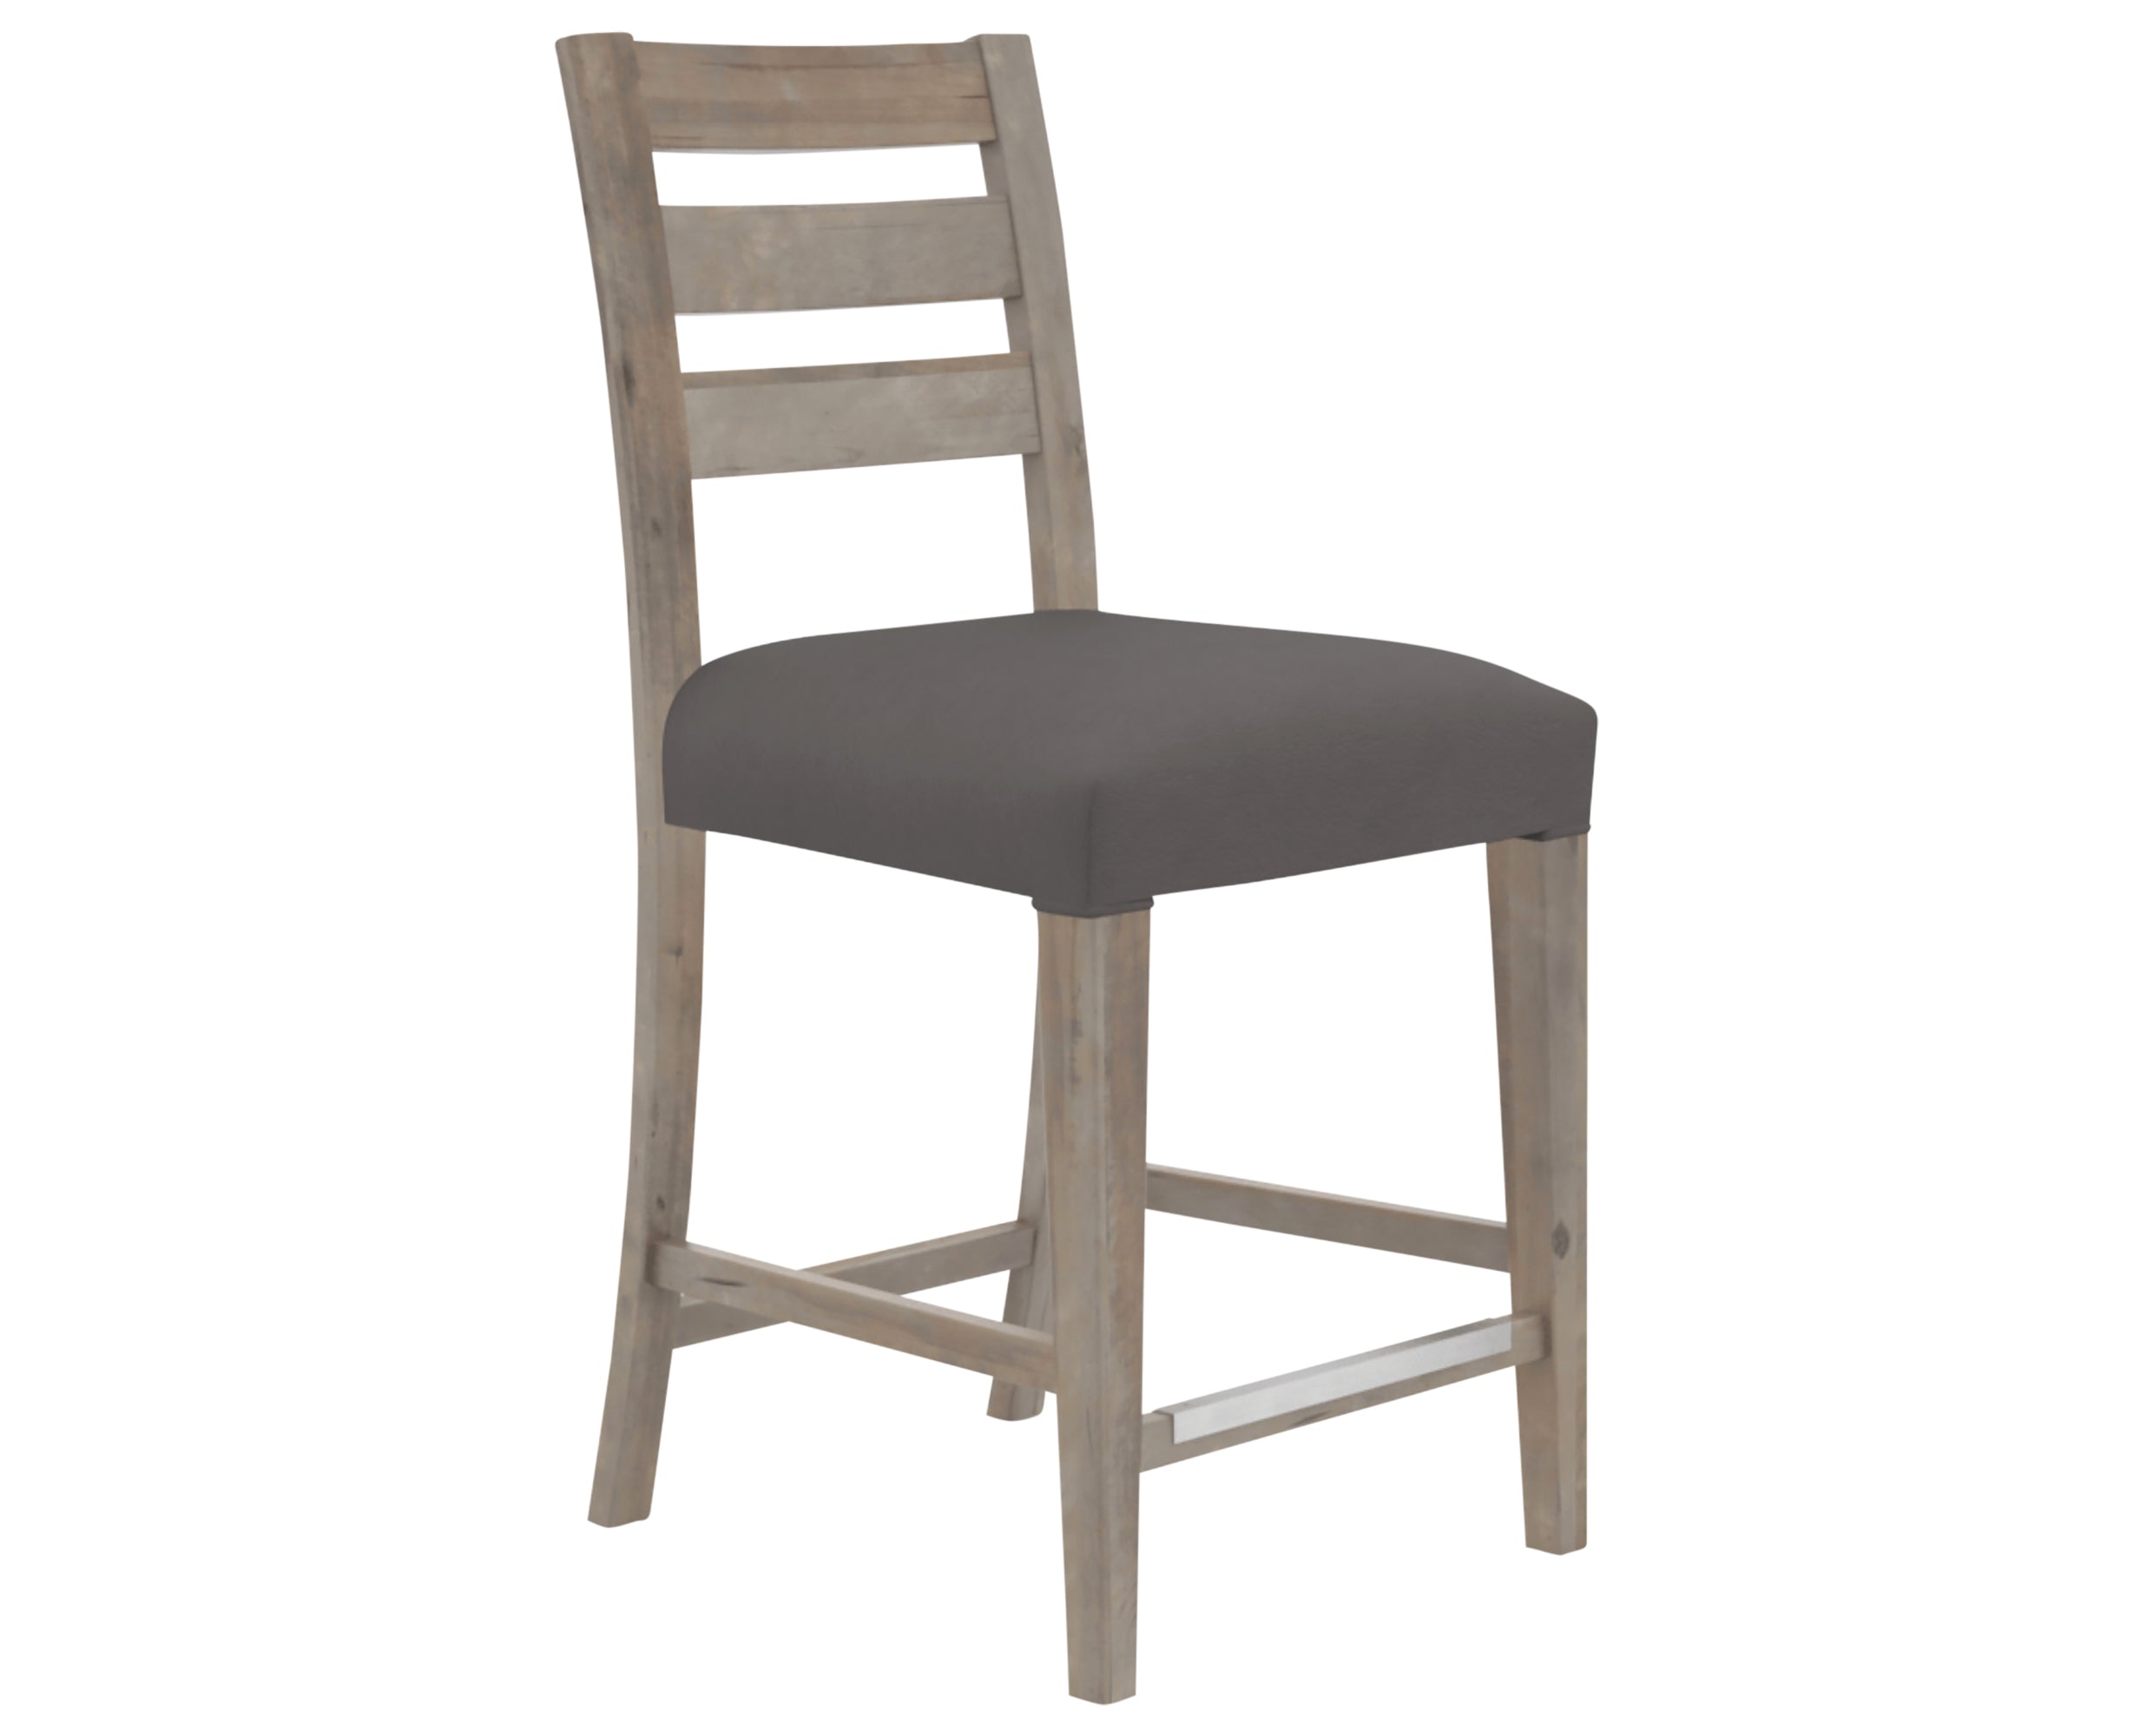 Shadow &amp; Faux Leather XU | Canadel Loft Counter Stool 8039 | Valley Ridge Furniture